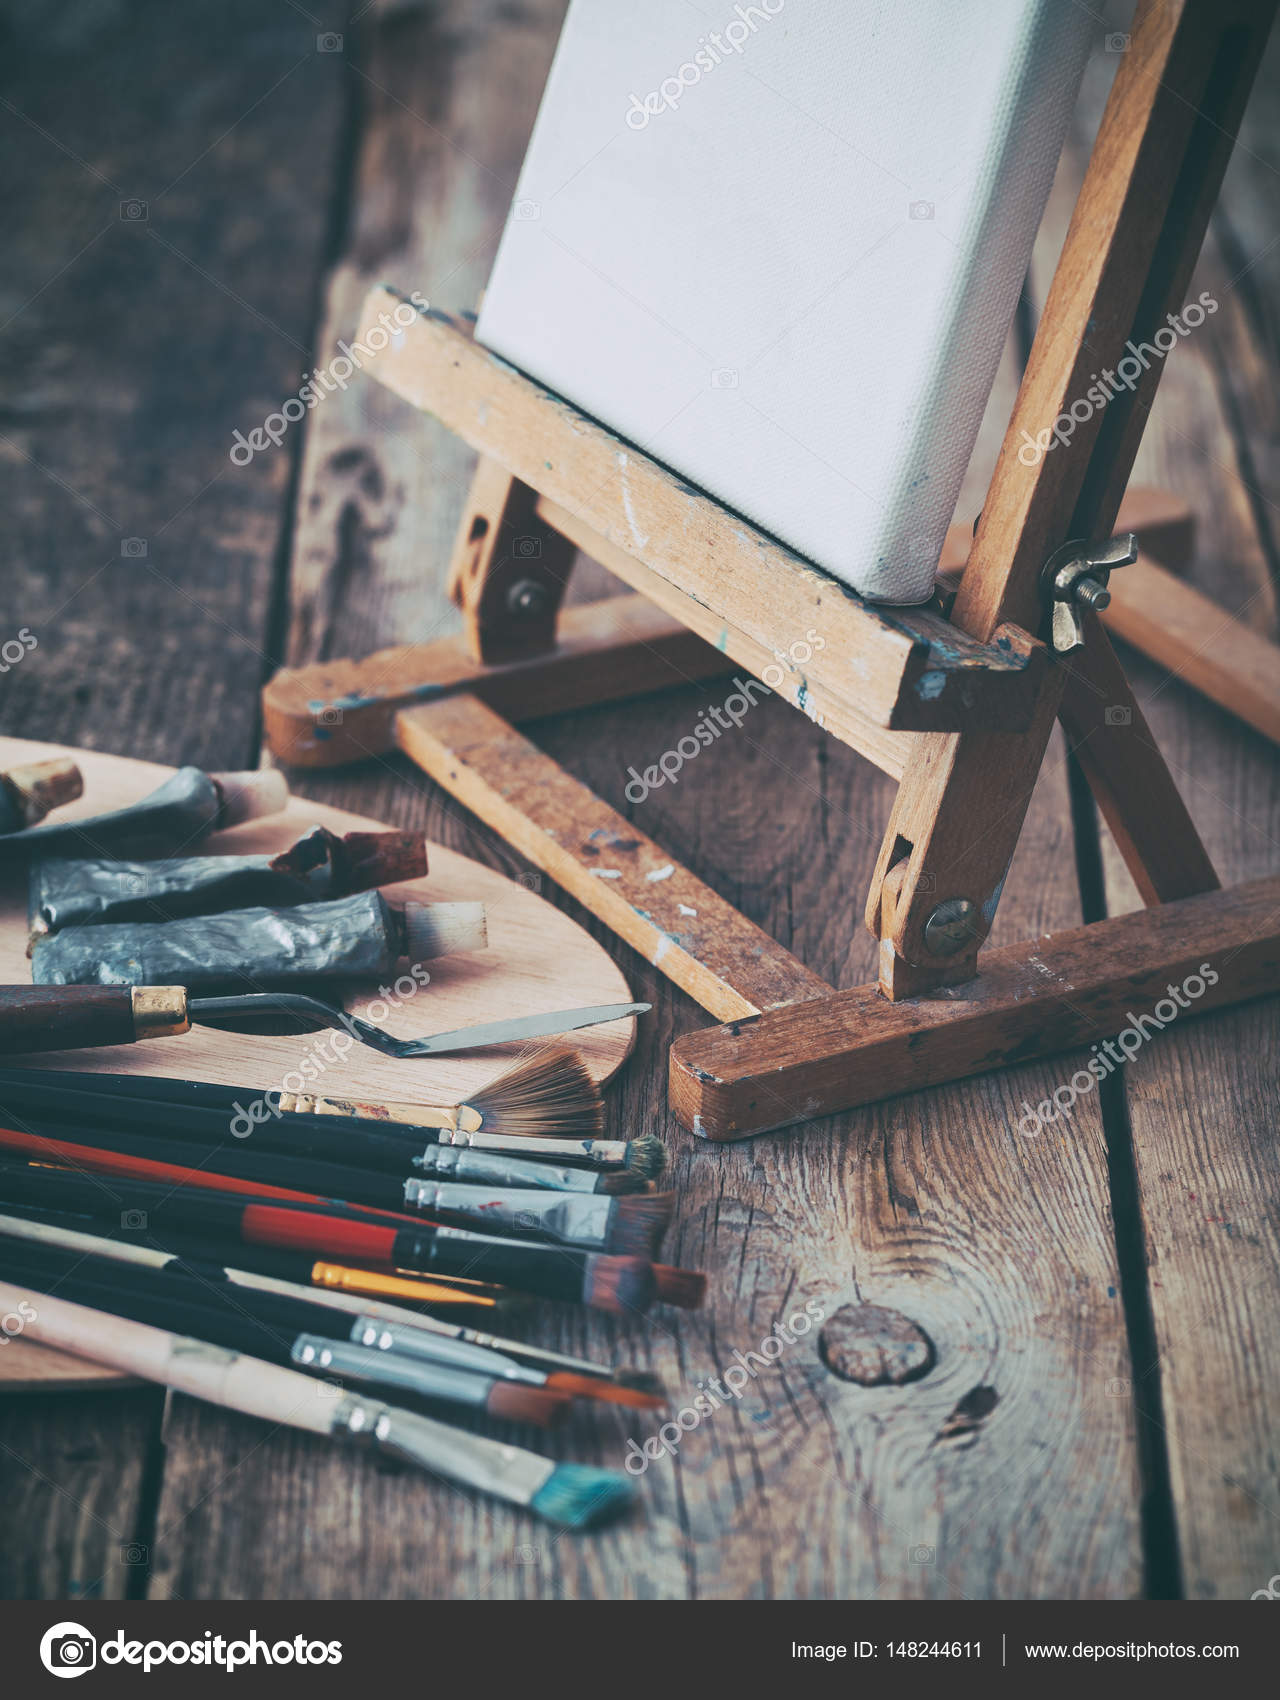 Artistic equipment: white artist canvas on easel, palette and paint brushes  in a artist studio. Retro toned. Stock Photo by ©ChamilleWhite 148244611